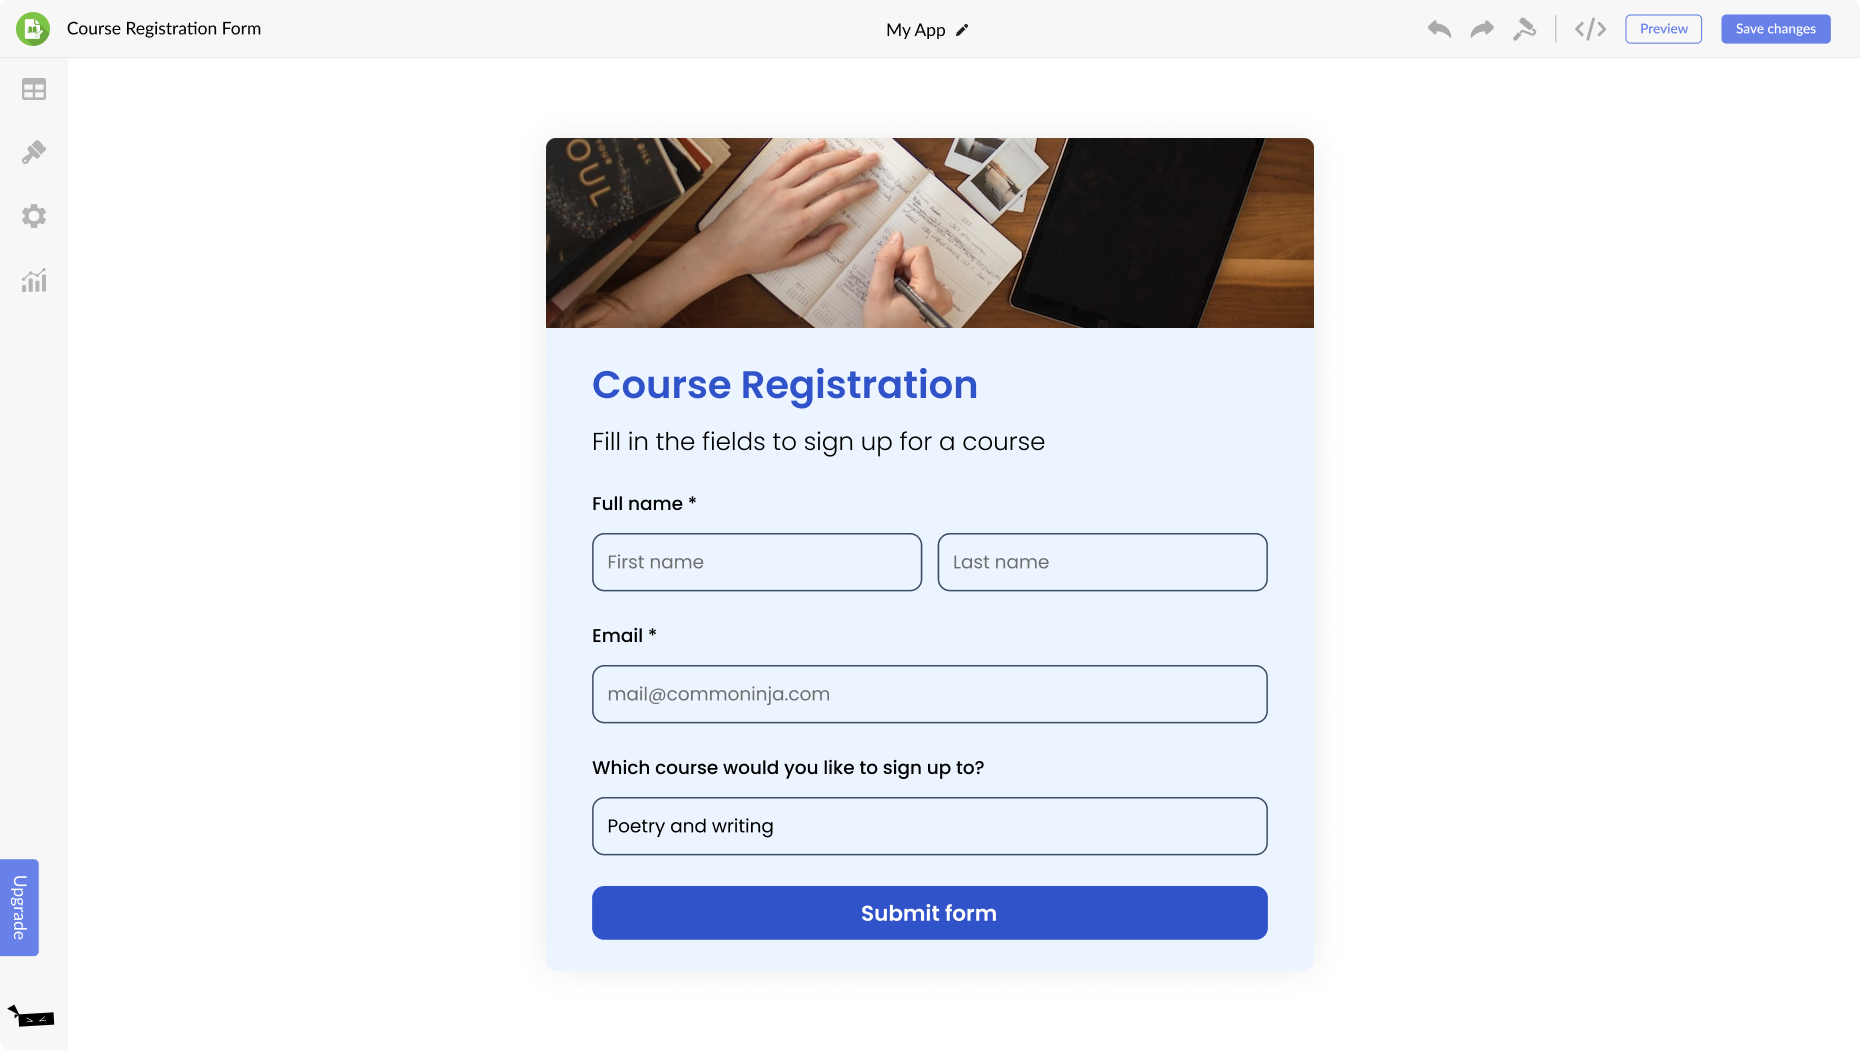 Course Registration Form for Neocities